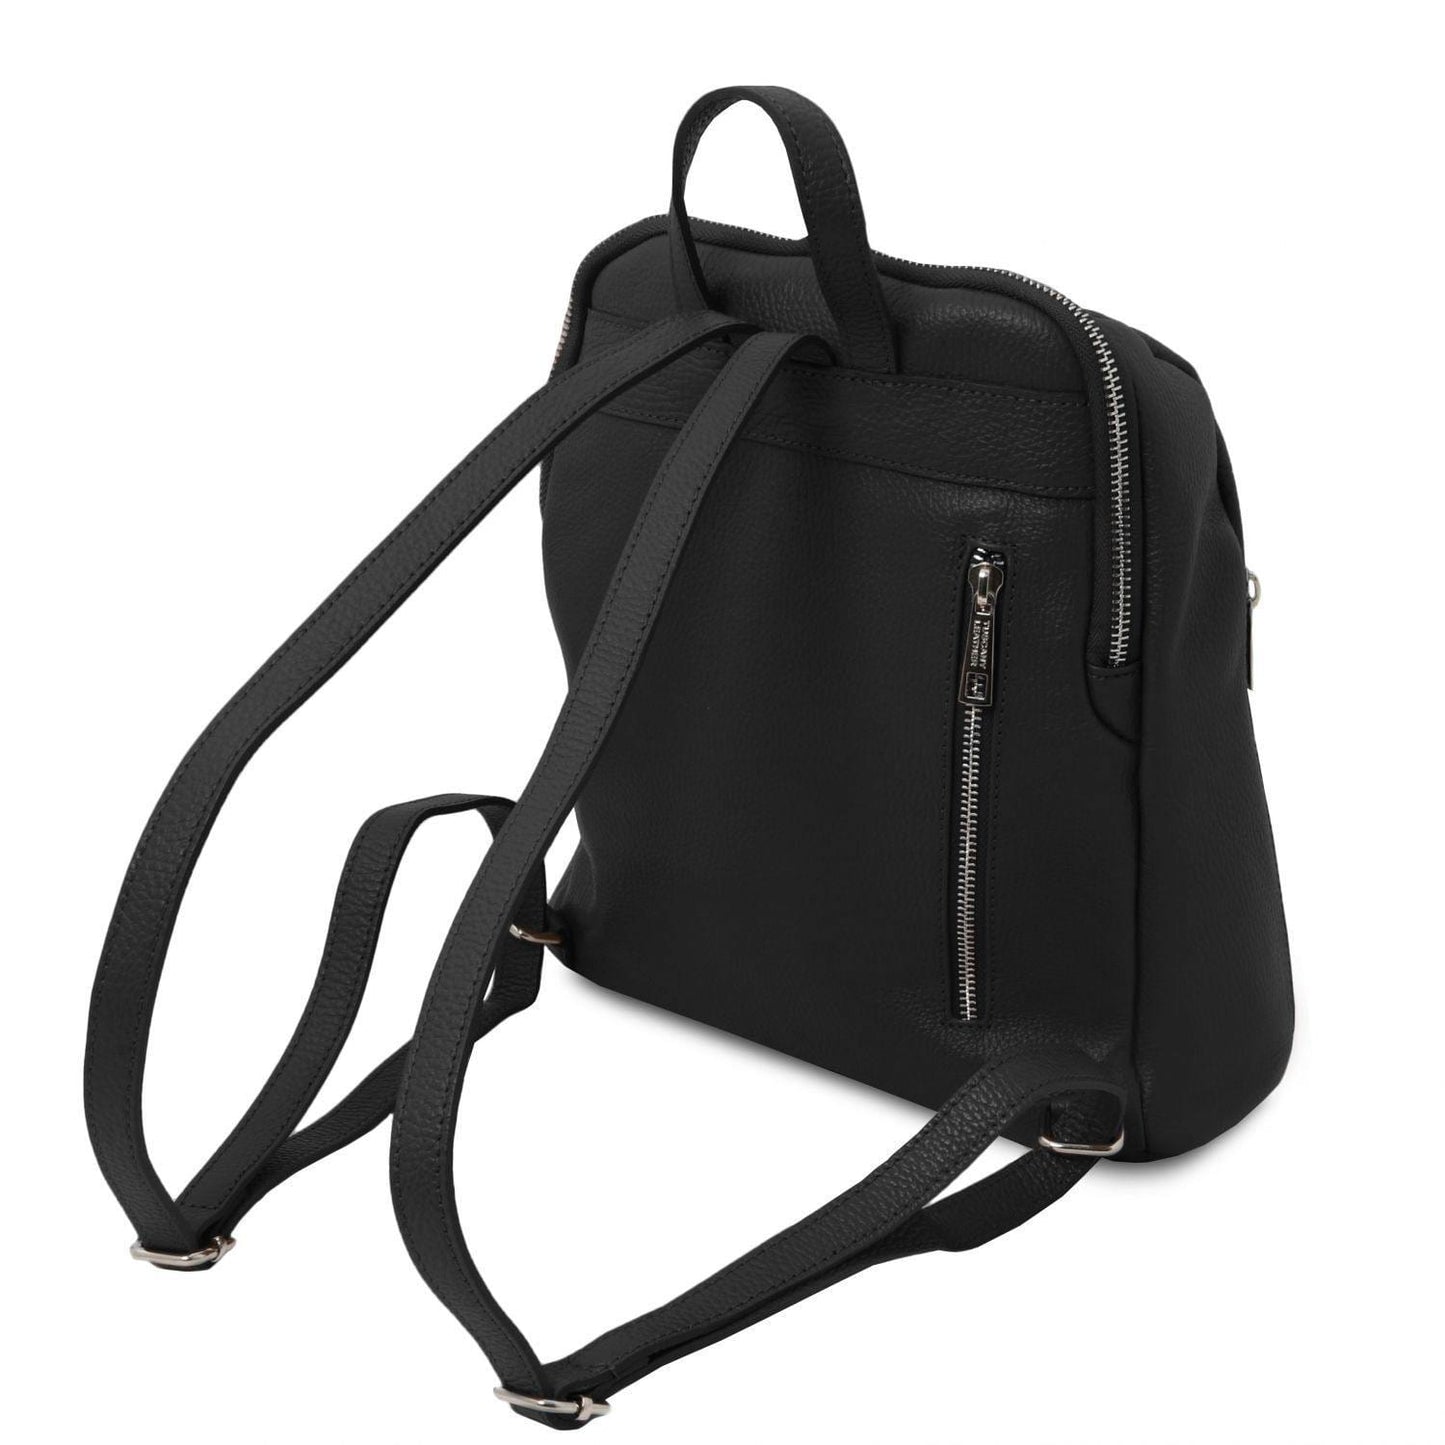 TL Bag - Soft leather backpack for women | TL141982 - Premium Leather backpacks for women - Shop now at San Rocco Italia